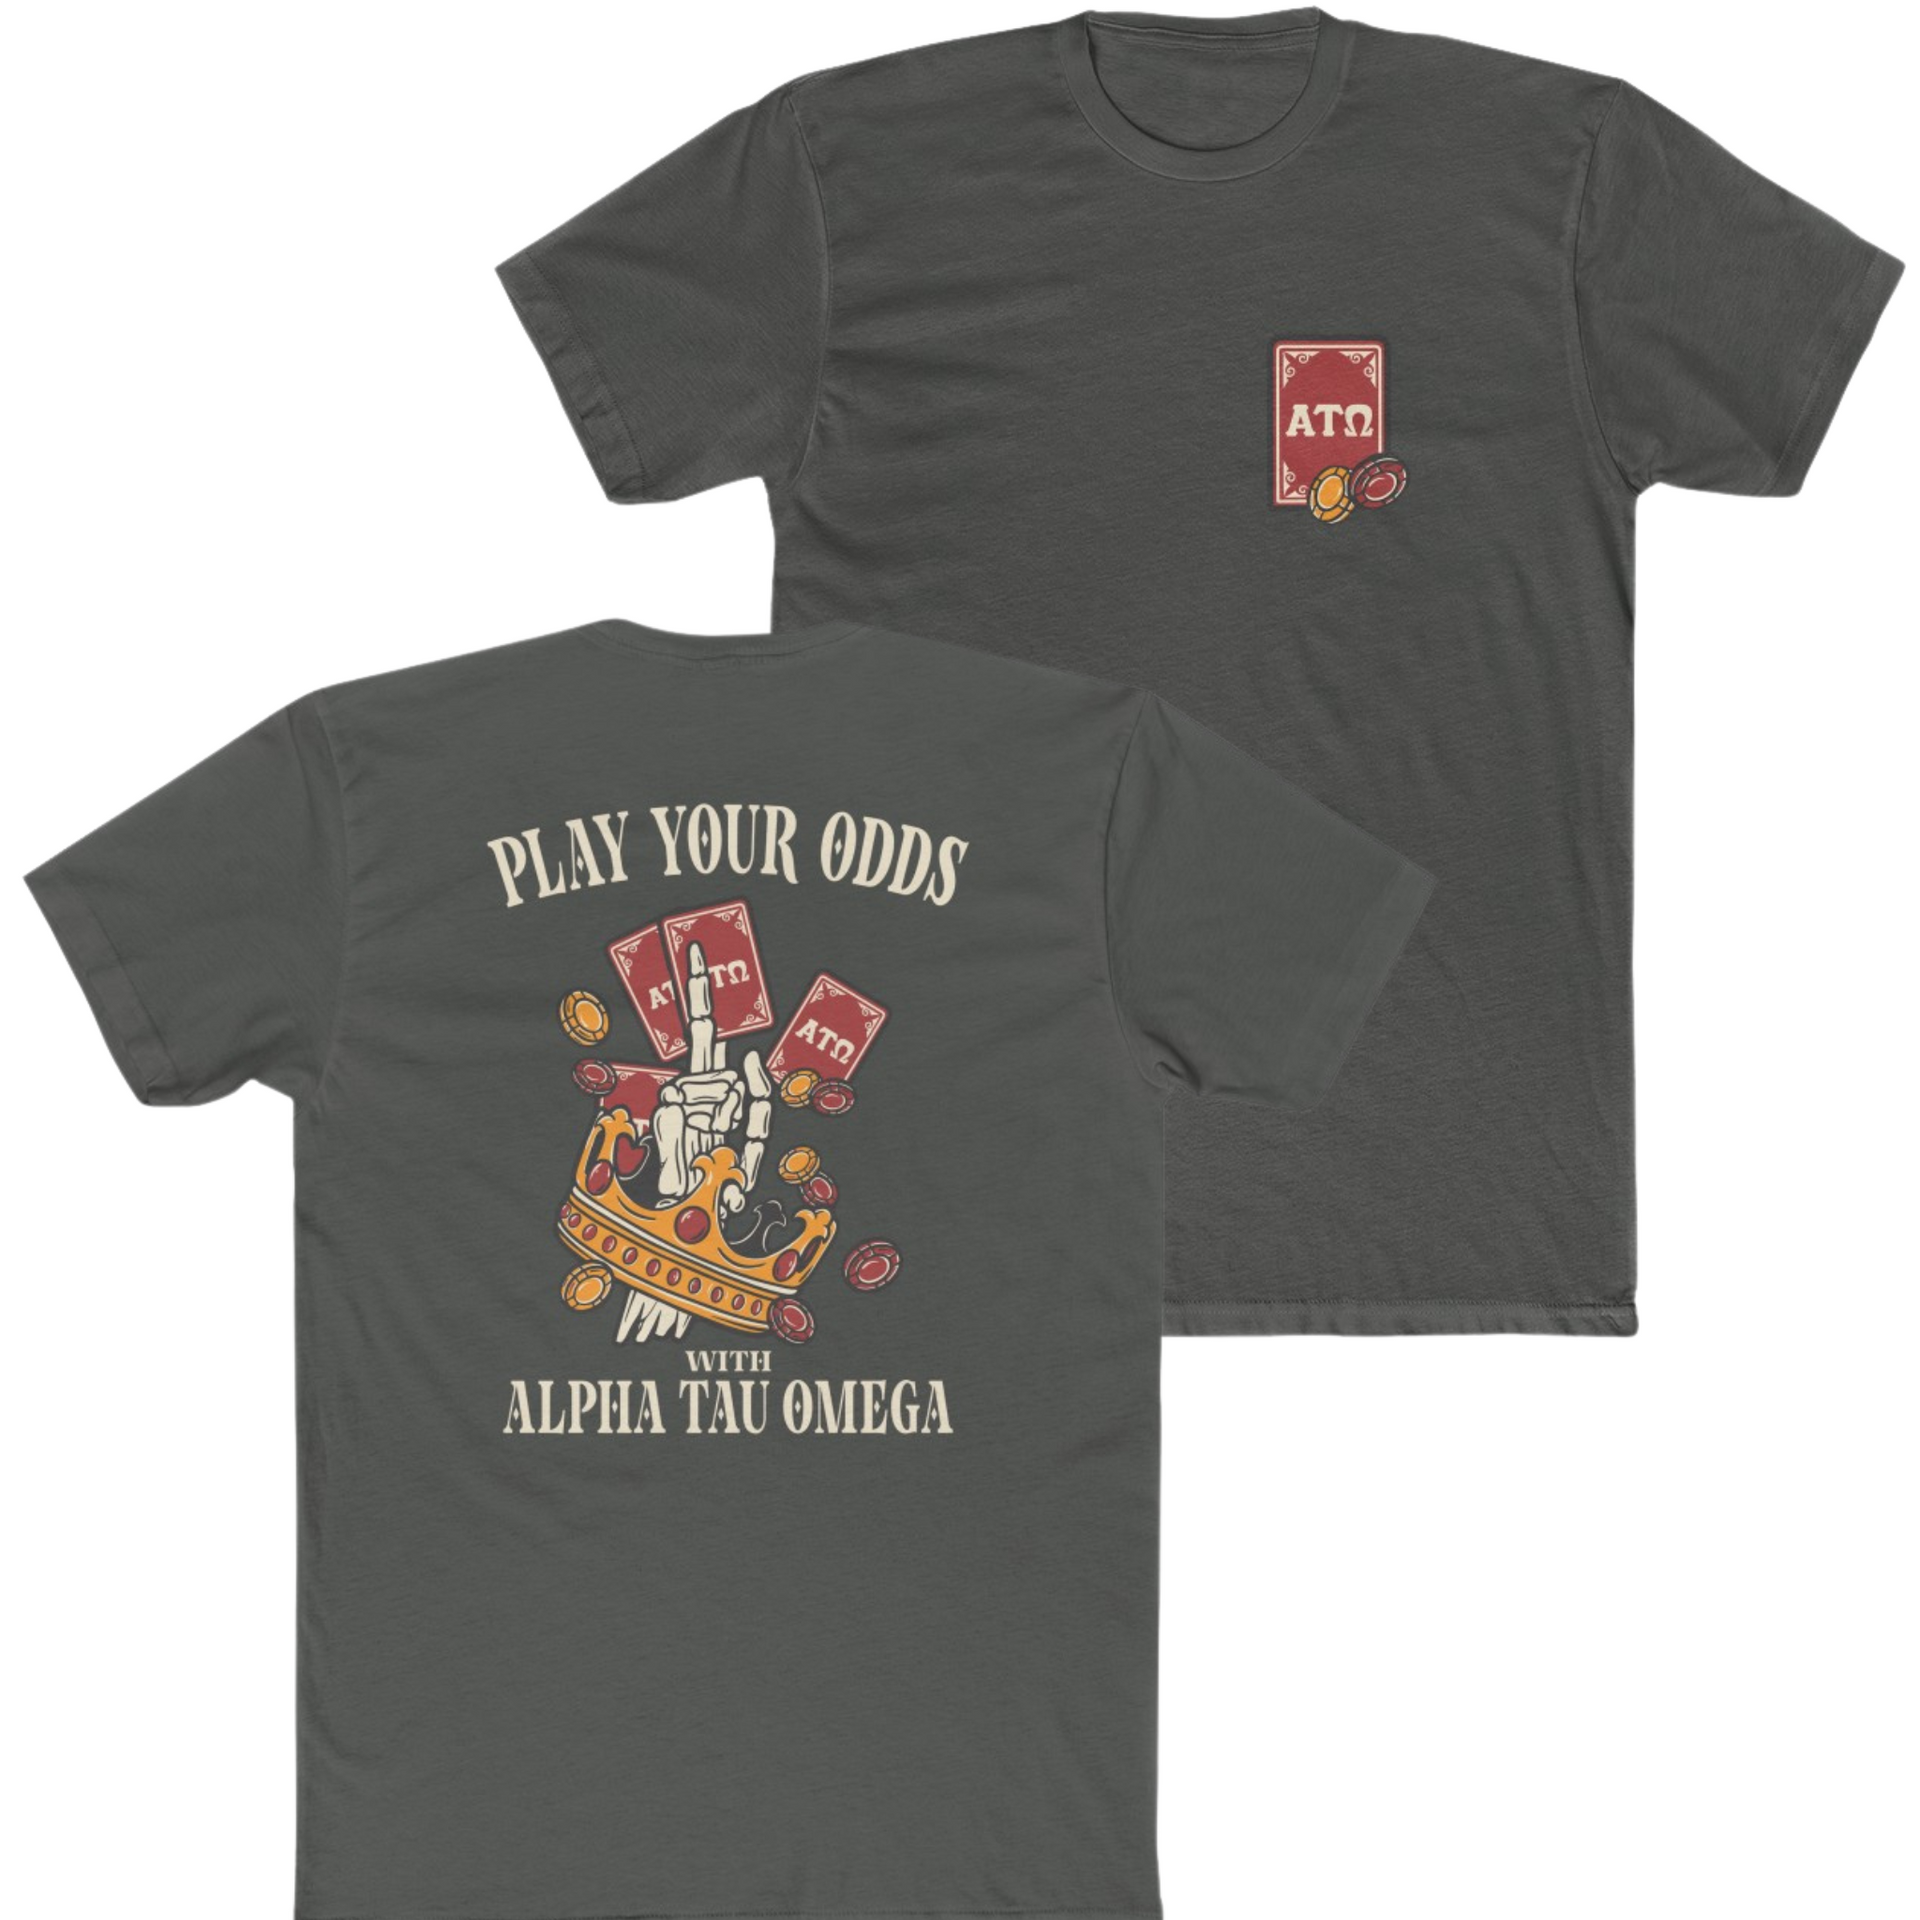 Grey Alpha Tau Omega Graphic T-Shirt | Play Your Odds | Fraternity Merchandise 